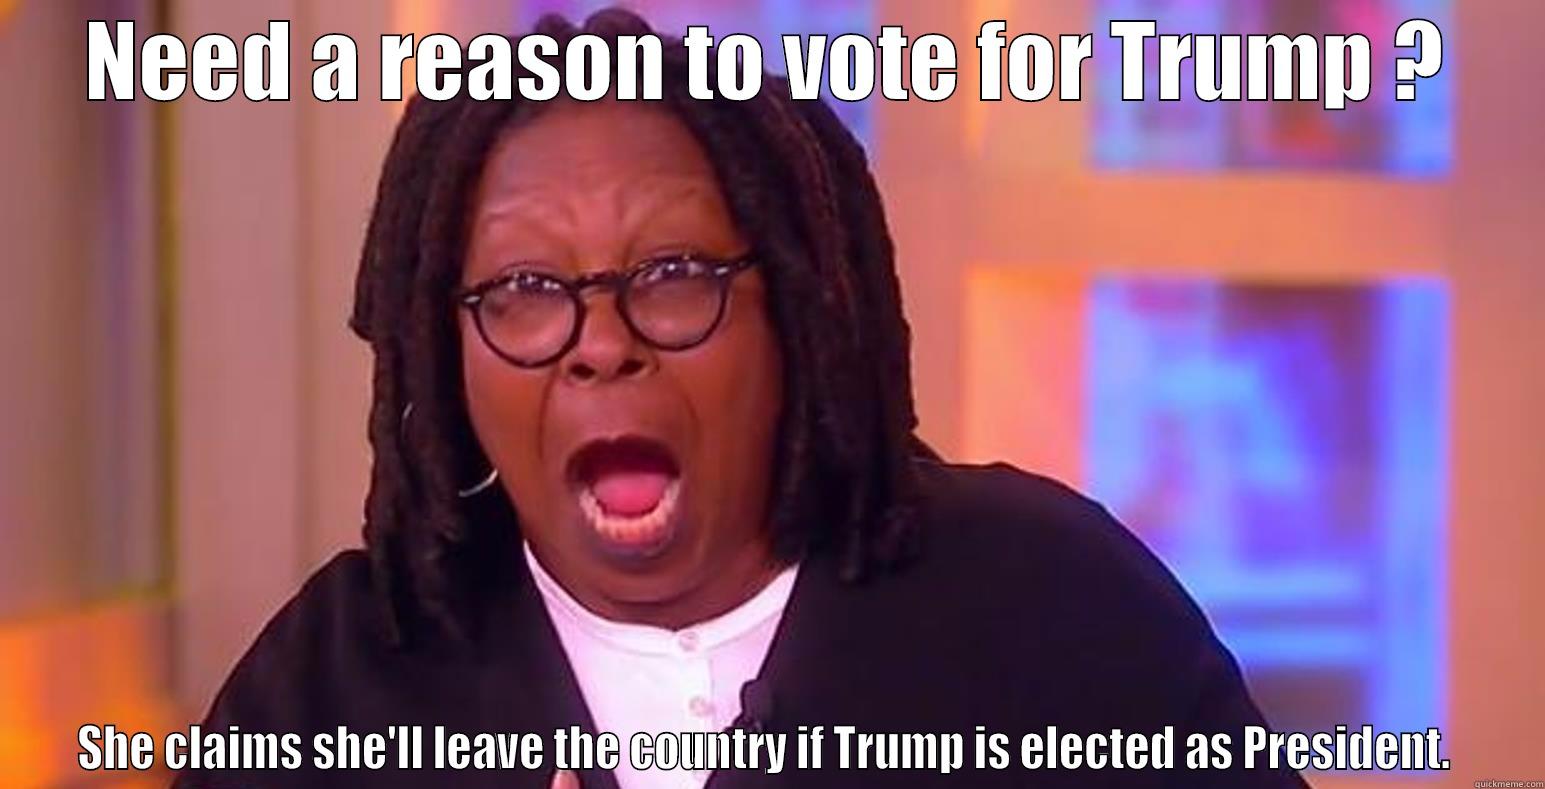 Big mouth Whoopi - NEED A REASON TO VOTE FOR TRUMP ? SHE CLAIMS SHE'LL LEAVE THE COUNTRY IF TRUMP IS ELECTED AS PRESIDENT.  Misc